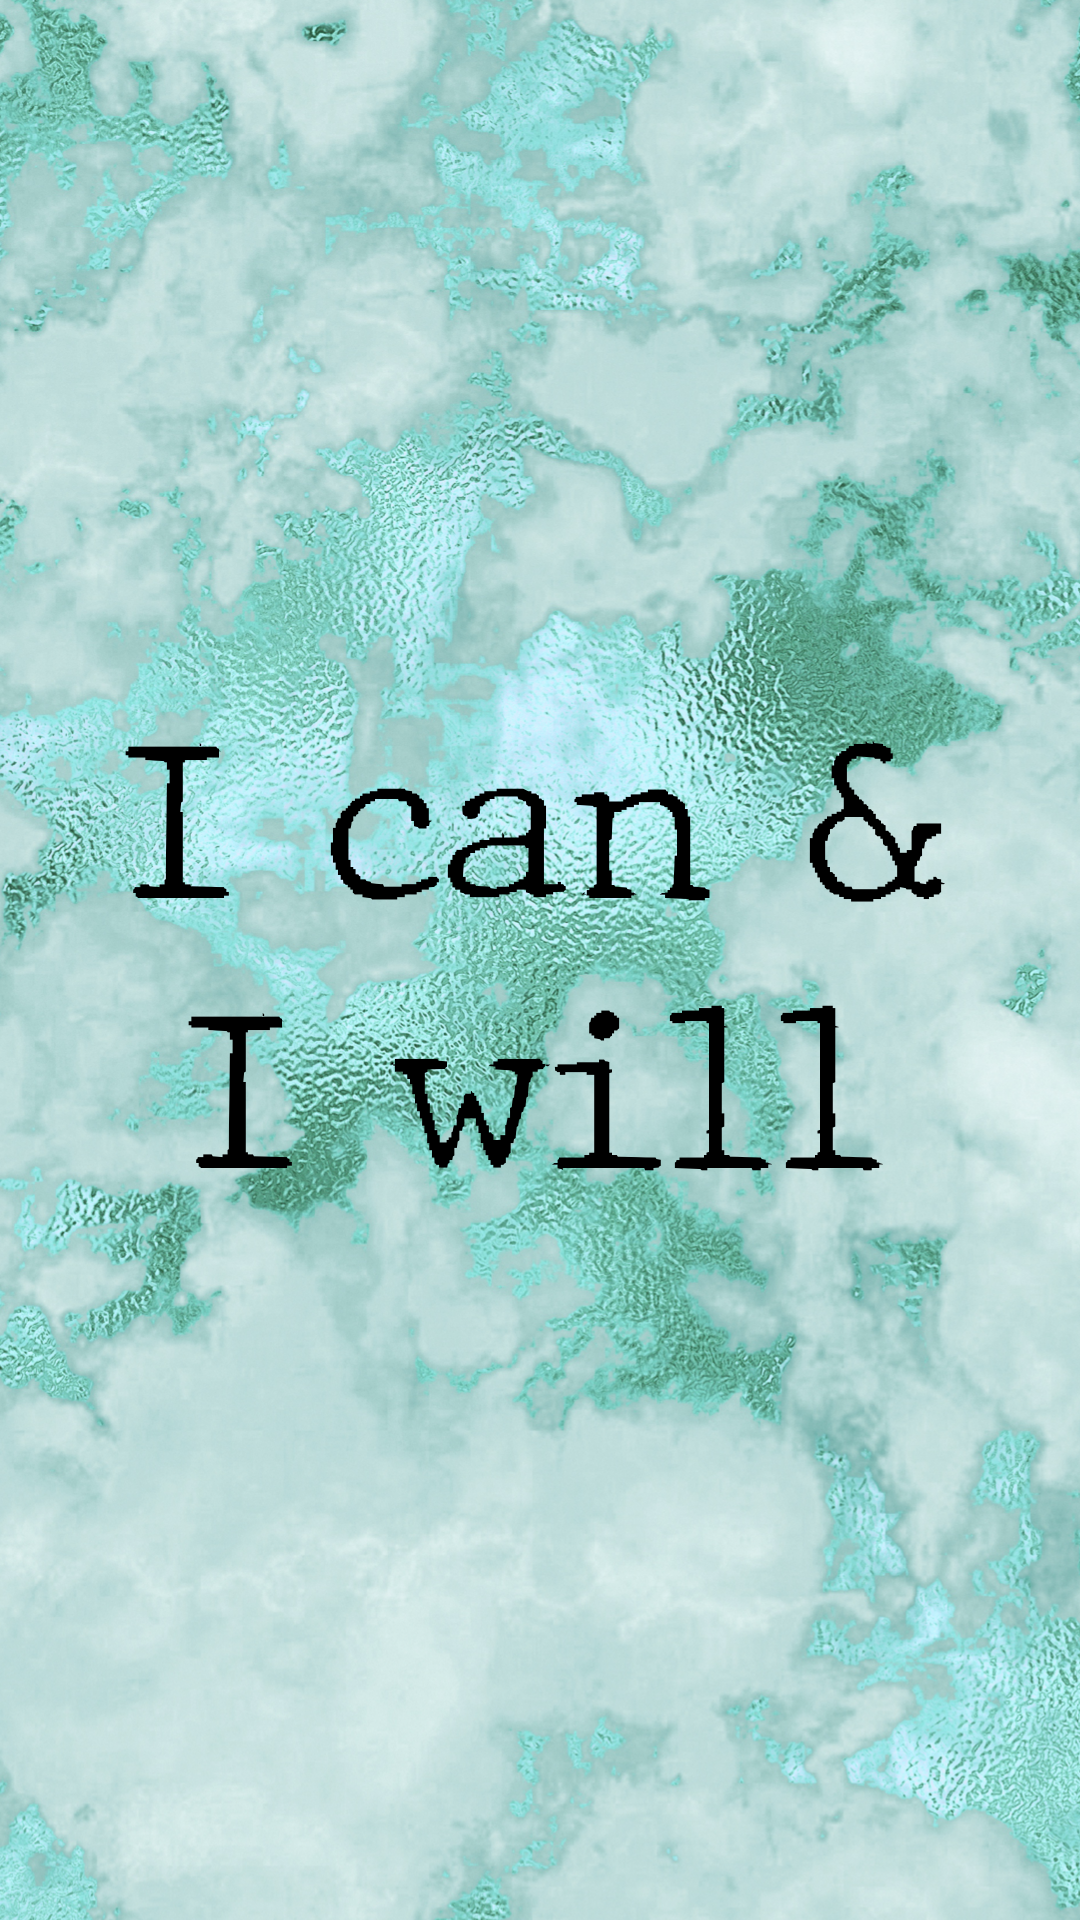 I Can And I Will Wallpapers - Wallpaper Cave